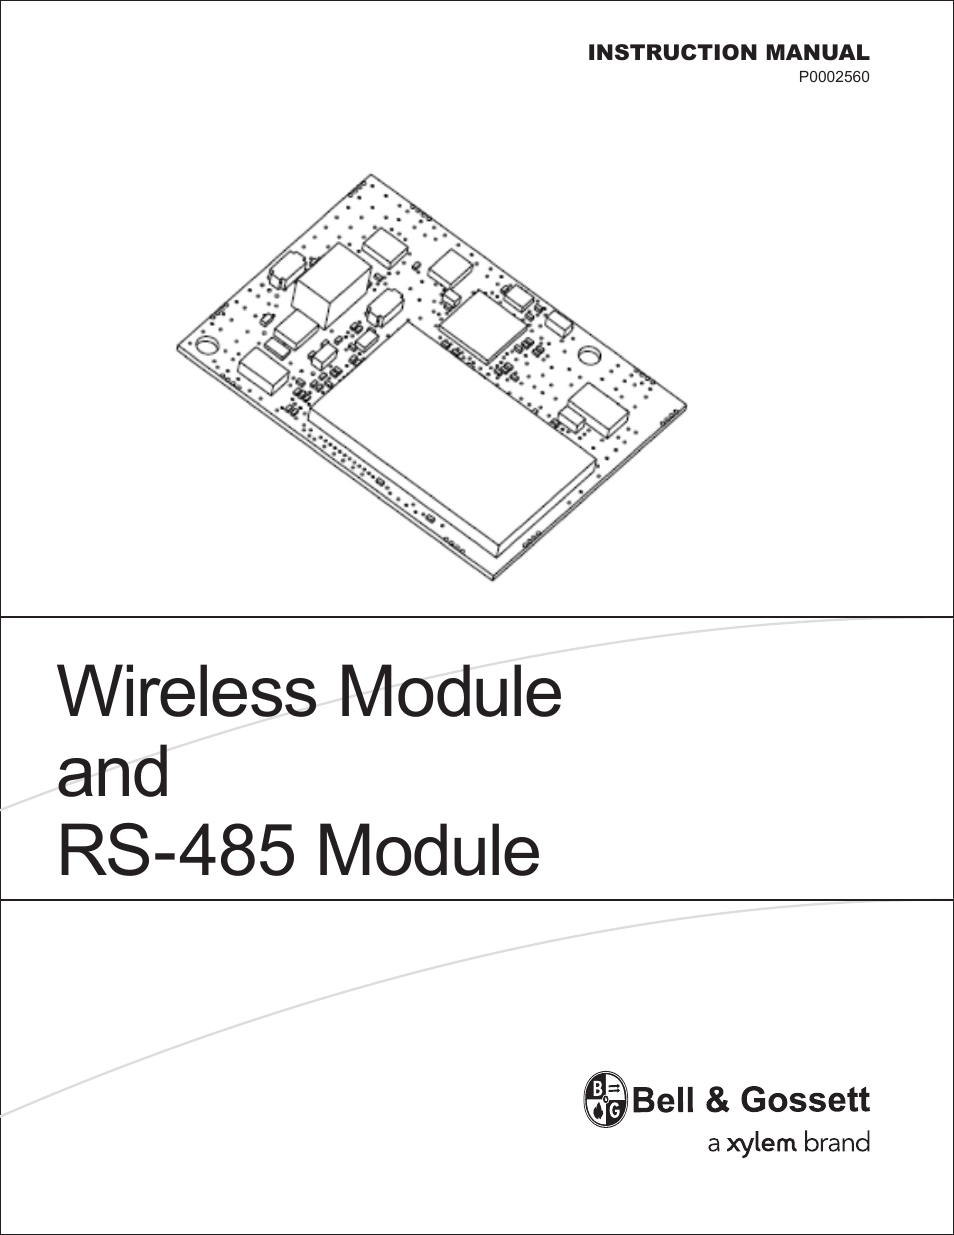 P0002560 Wireless Module and RS-485 Module